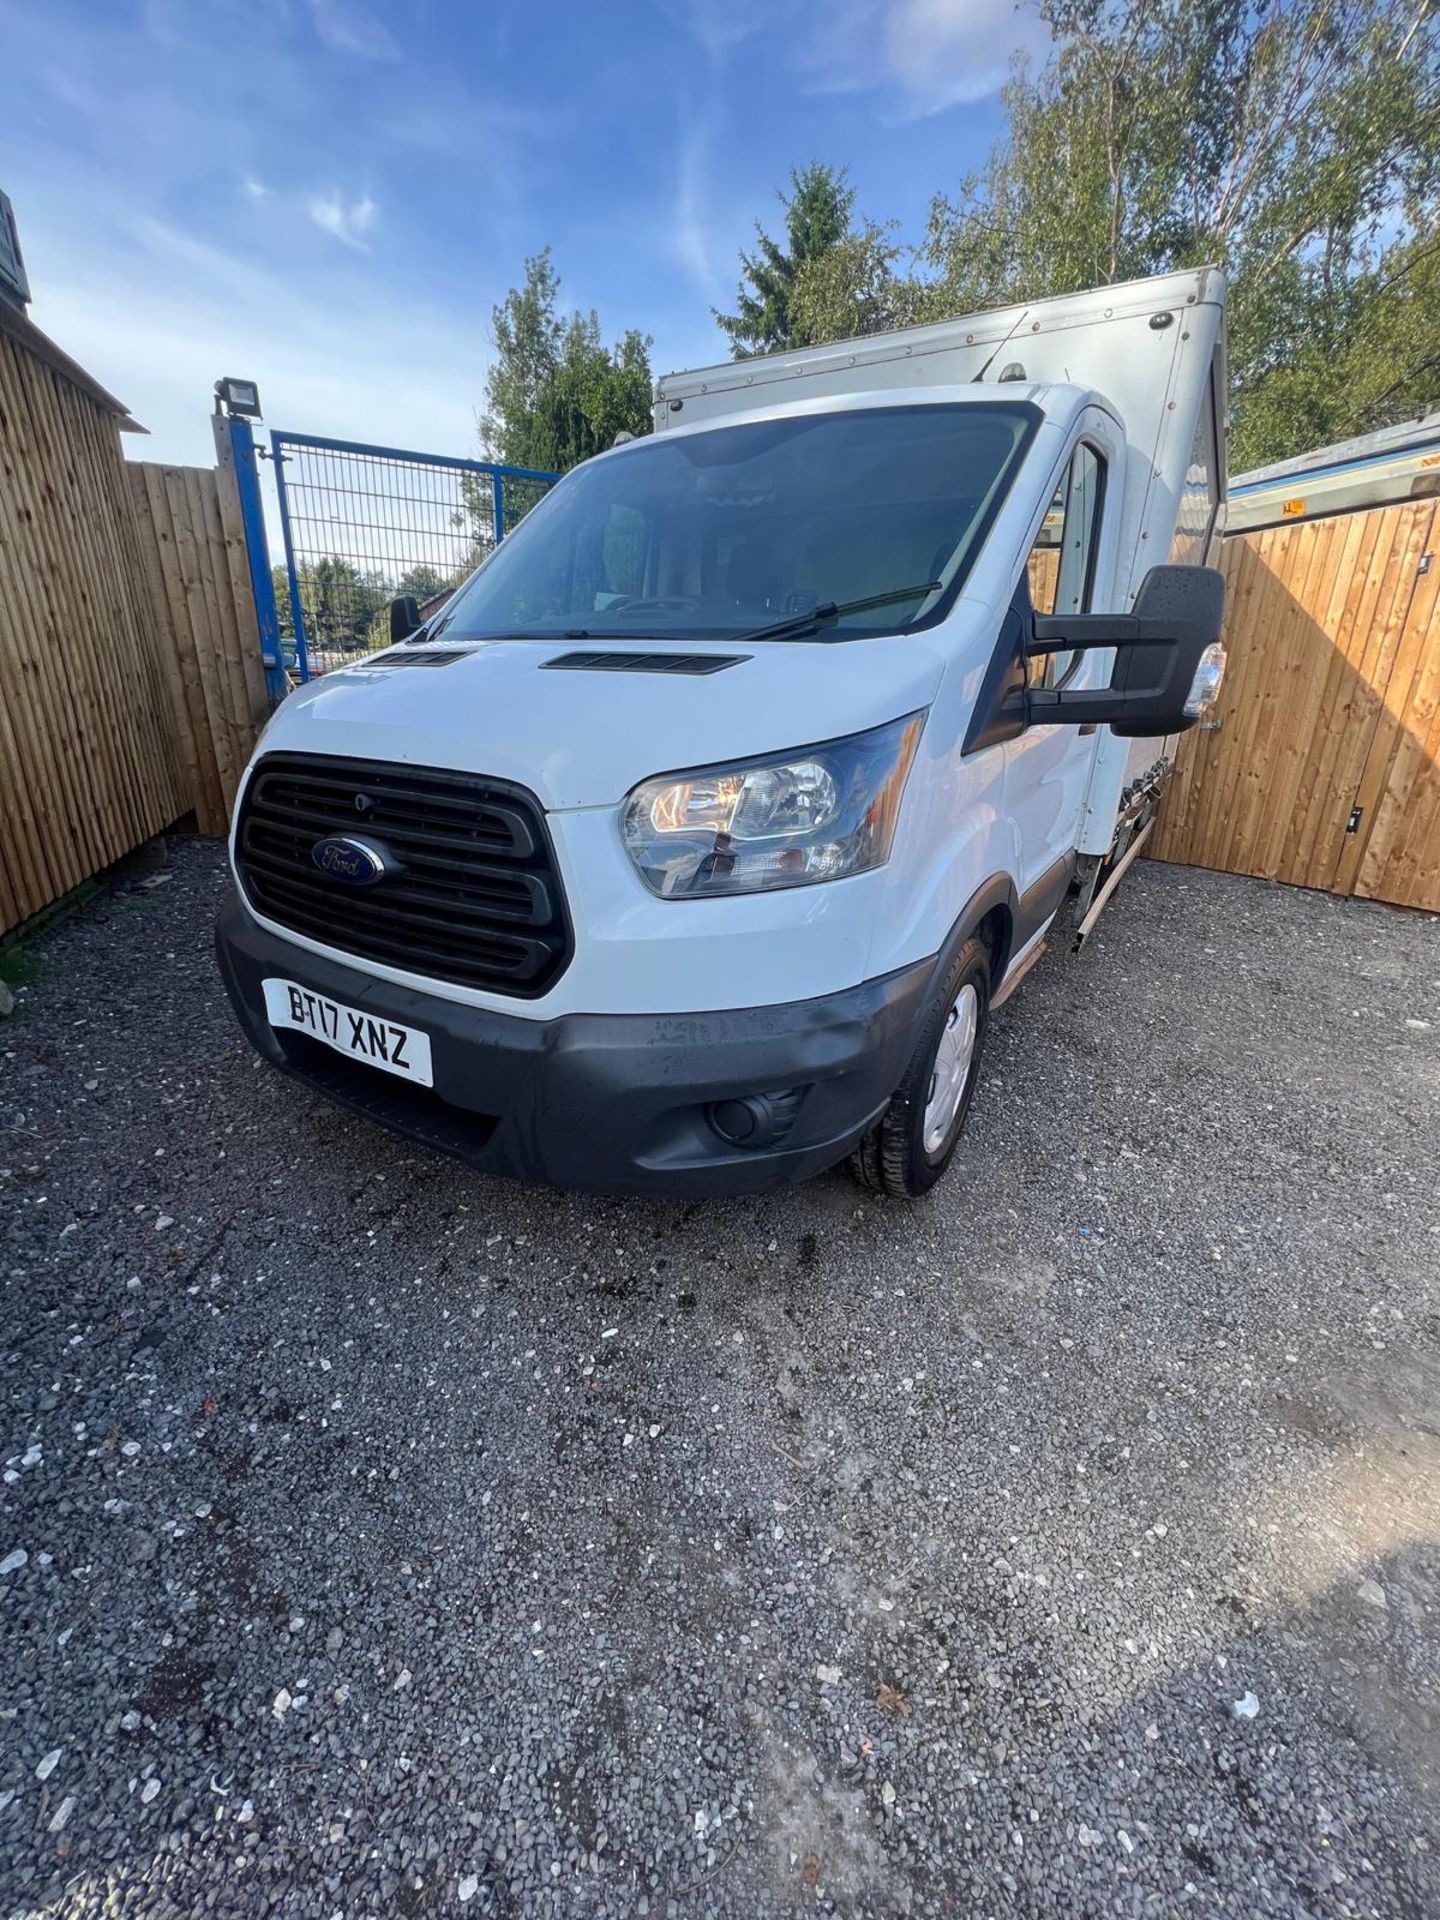 FORD TRANSIT BOX VAN 2017 LUTON EURO6 LWB 6 SPEED MANUAL 1COMPANY OWNER FROM NEW - Image 10 of 14